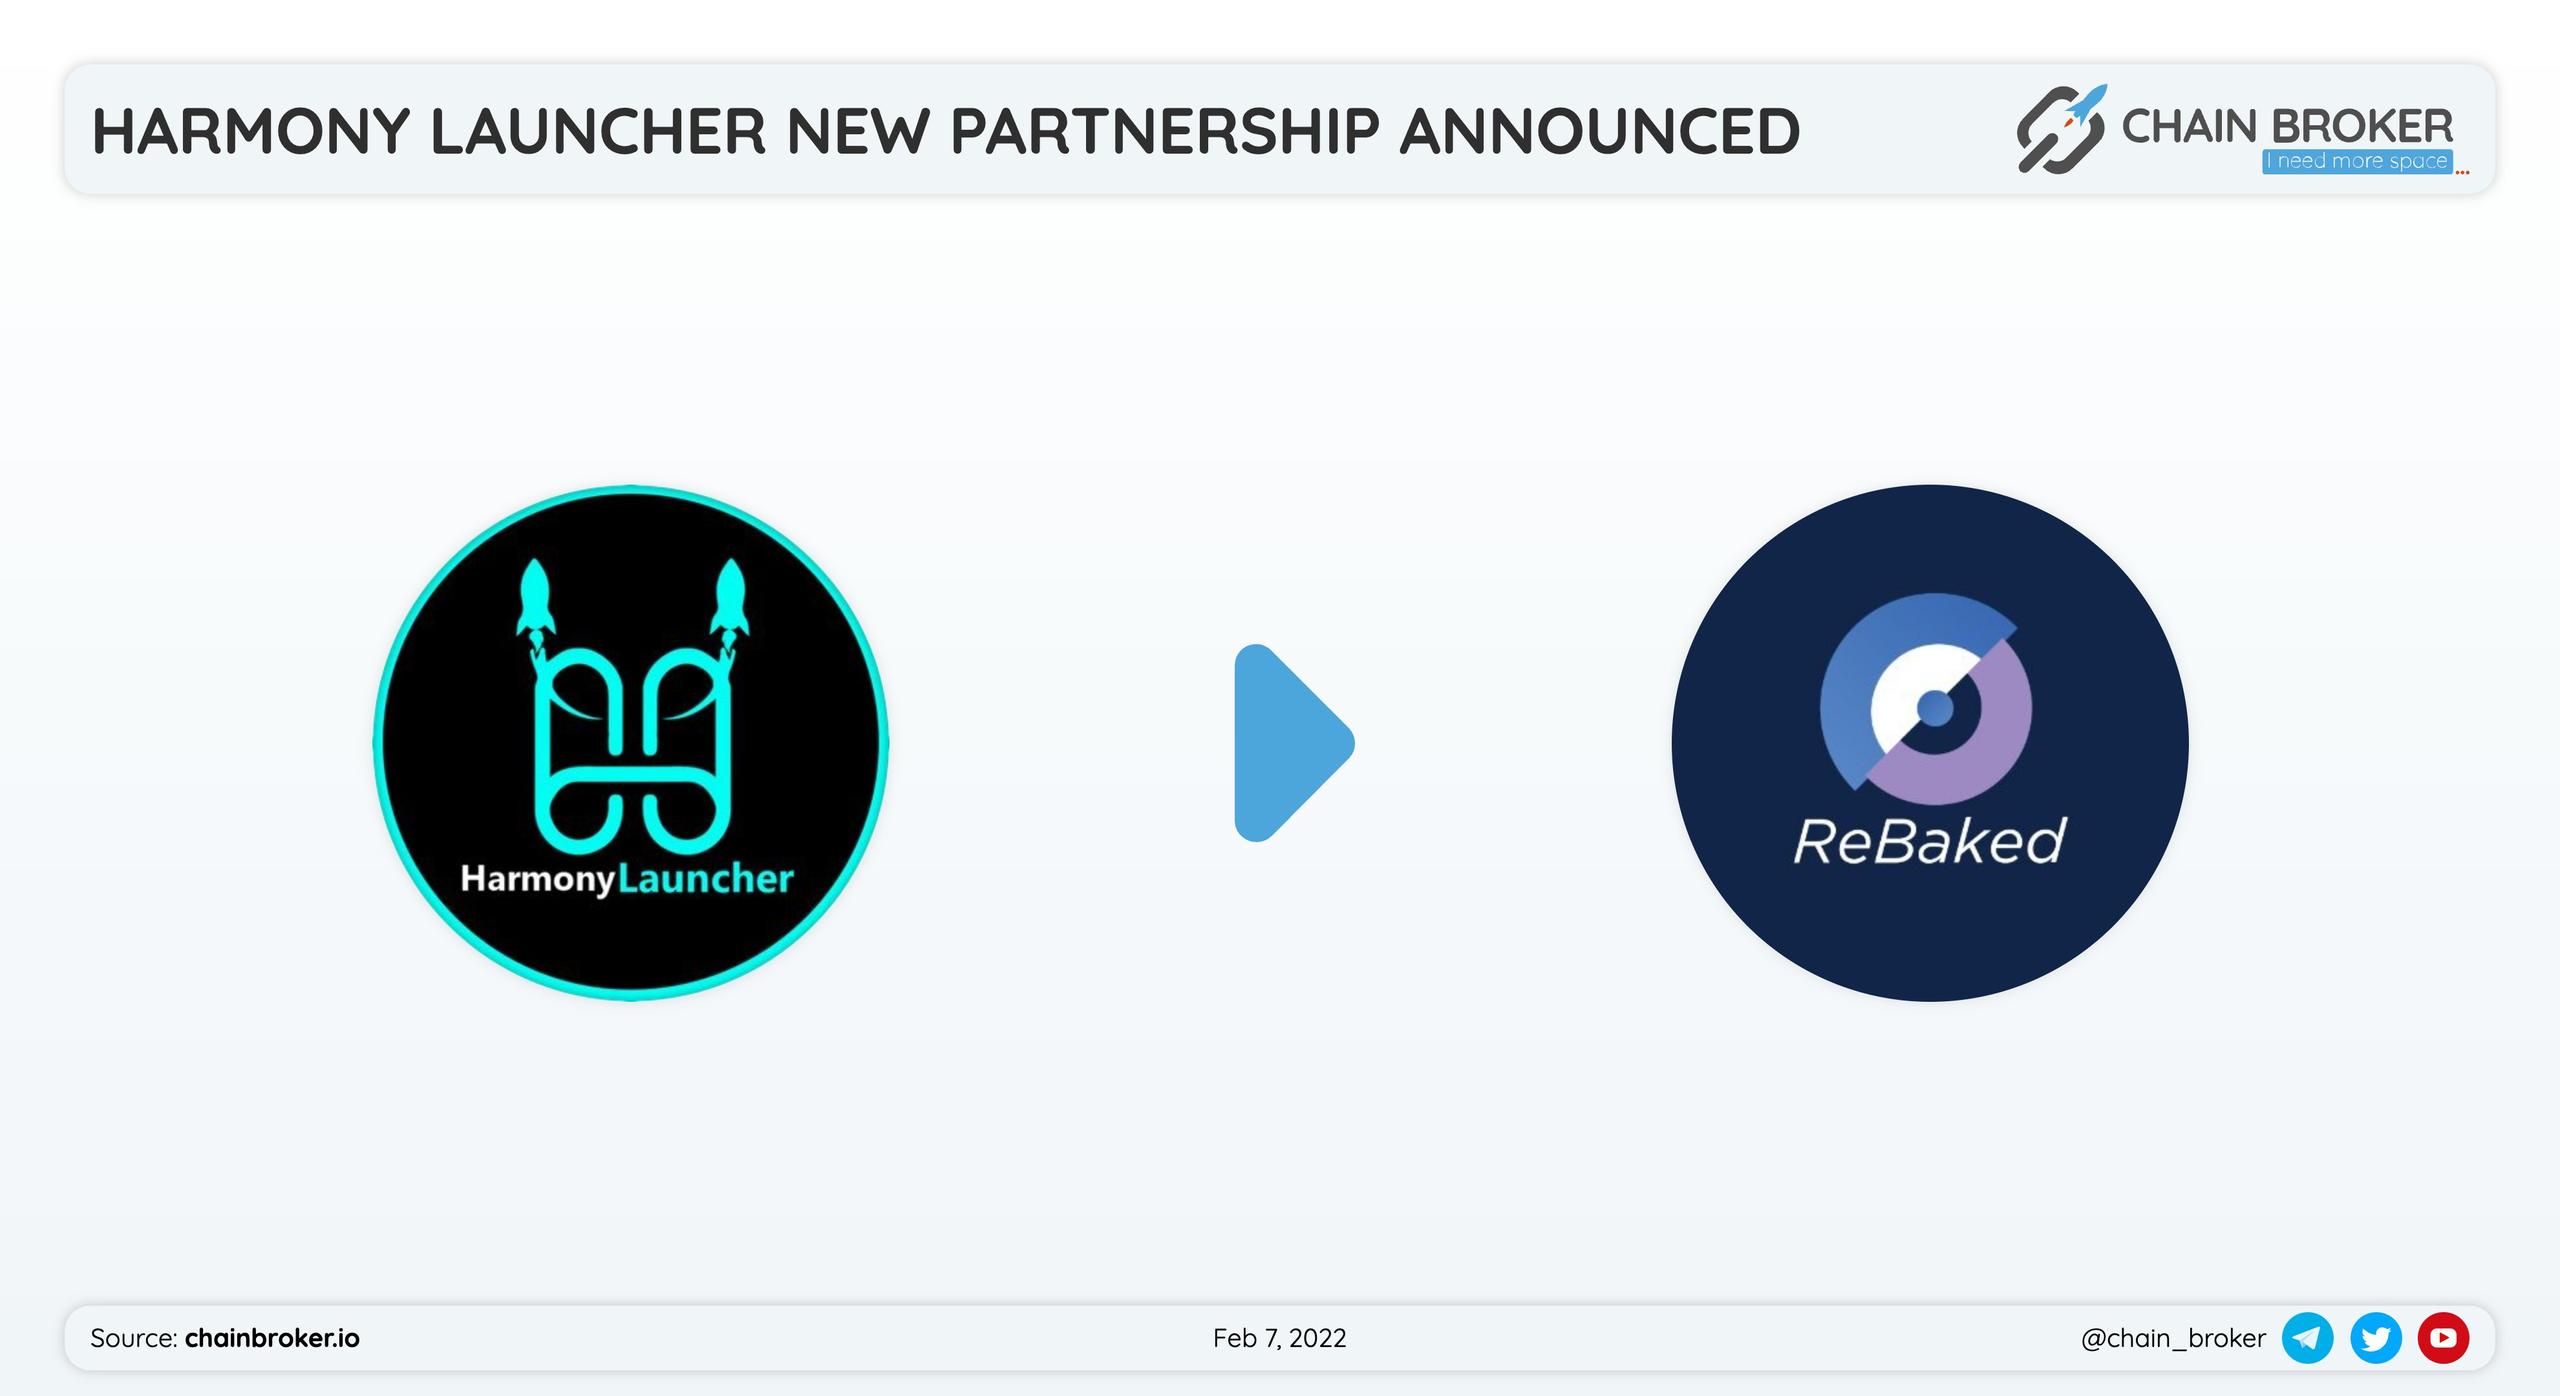 Harmony Launcher has partnered with rebaked